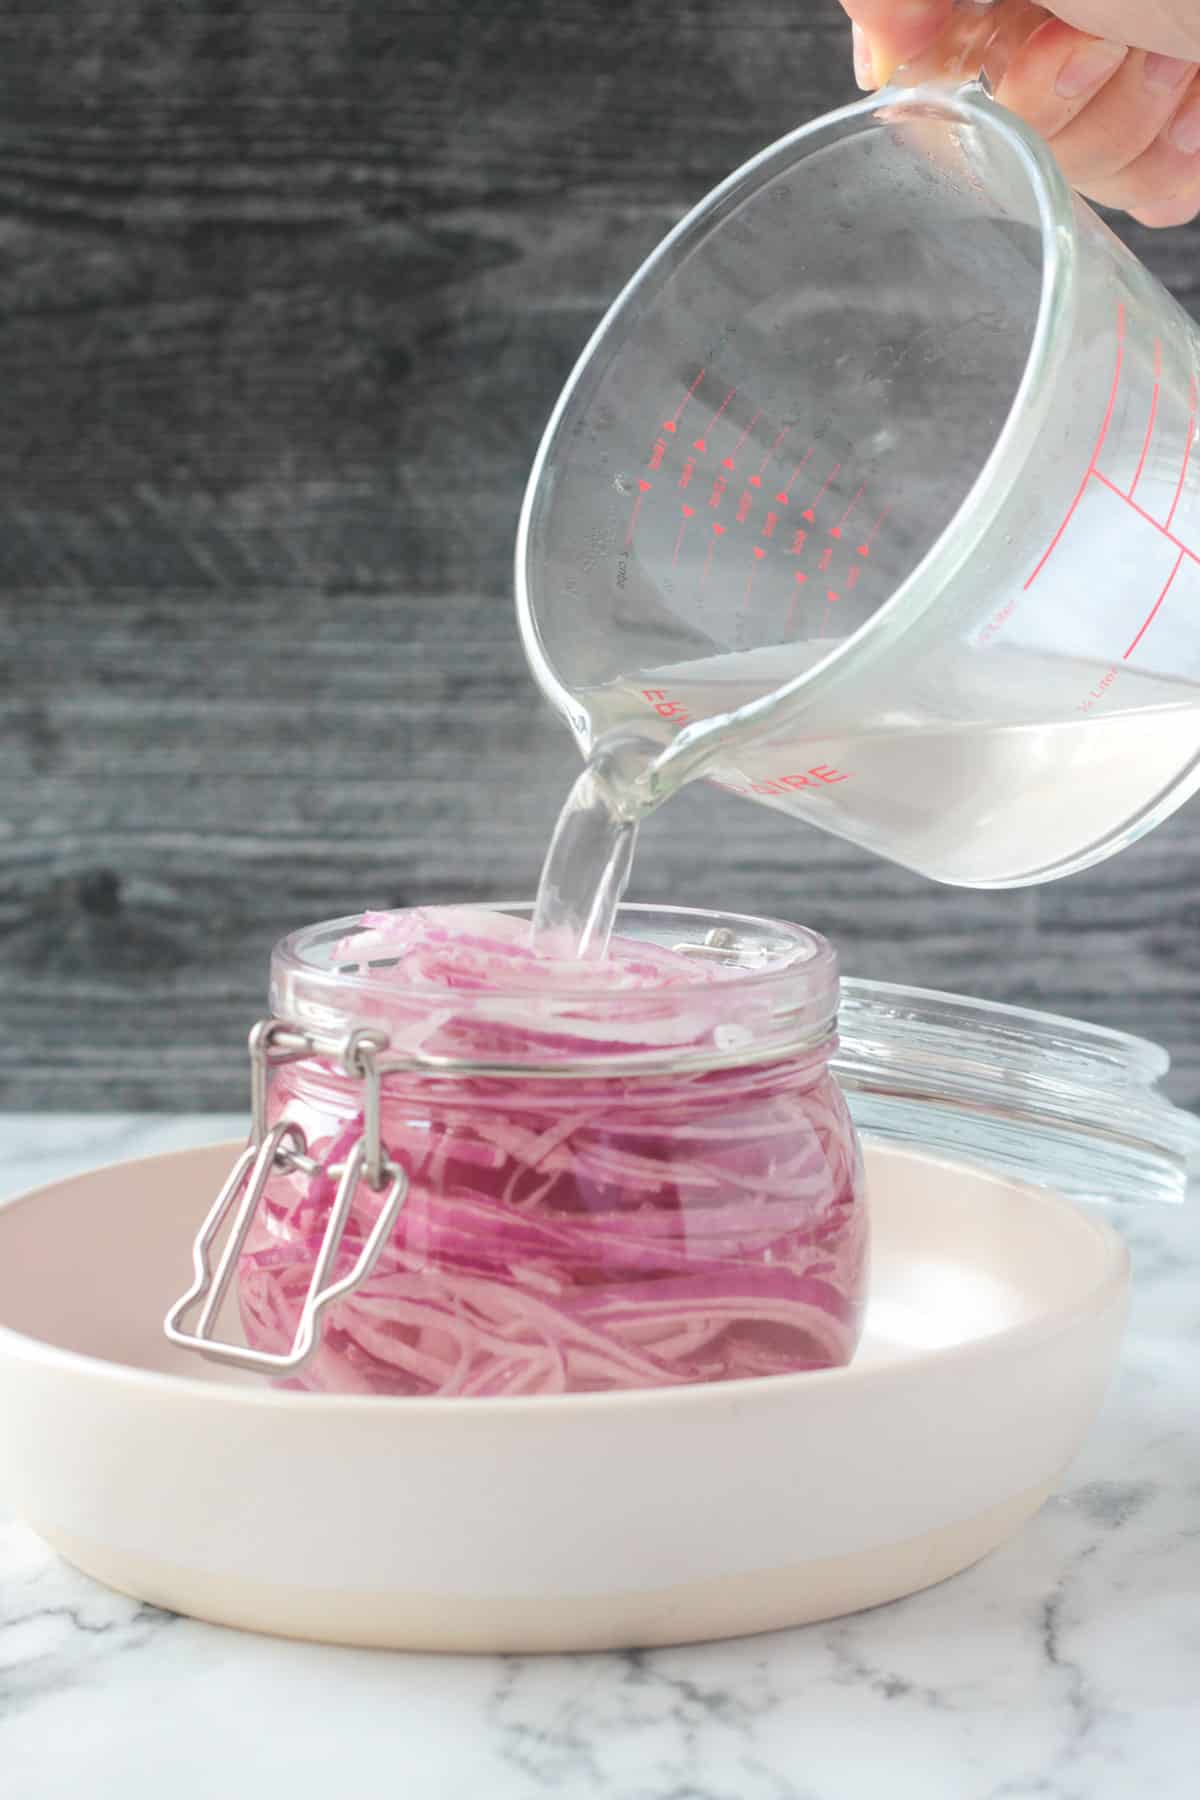 Pouring liquid ingredients into a jar of sliced red onions.